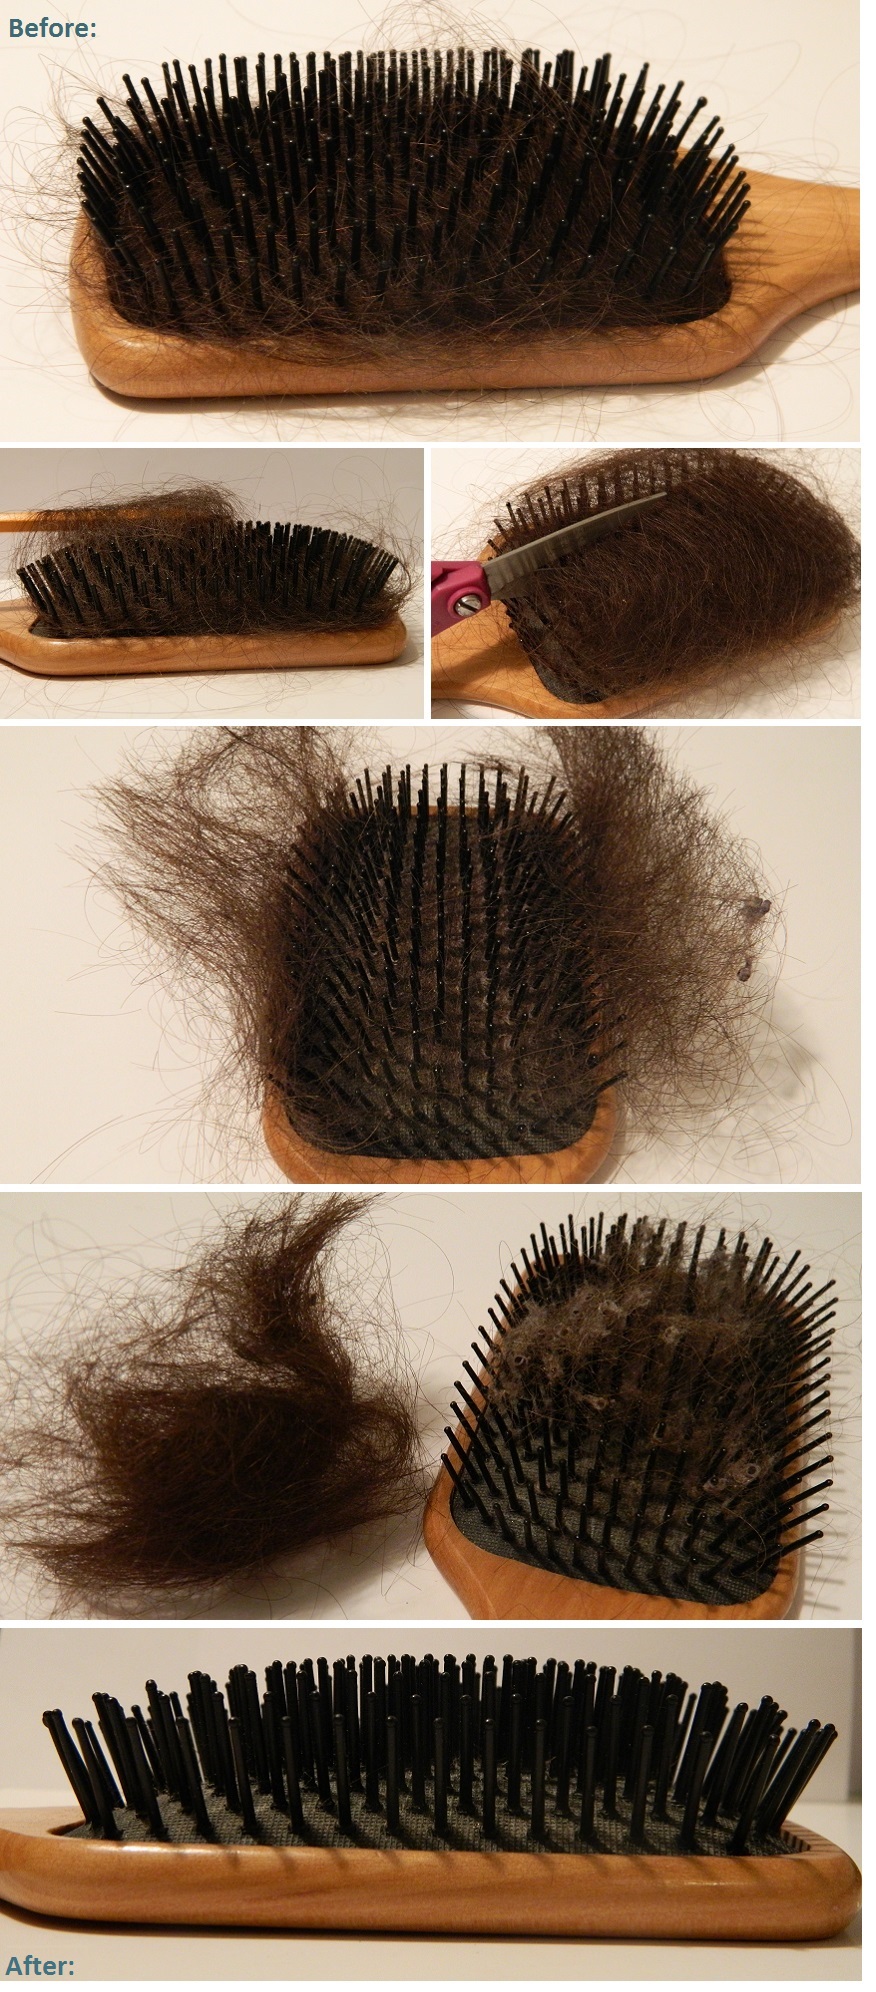 https://www.beautystoredepot.com/product_images/uploaded_images/how-to-clean-a-hairbrush.jpg